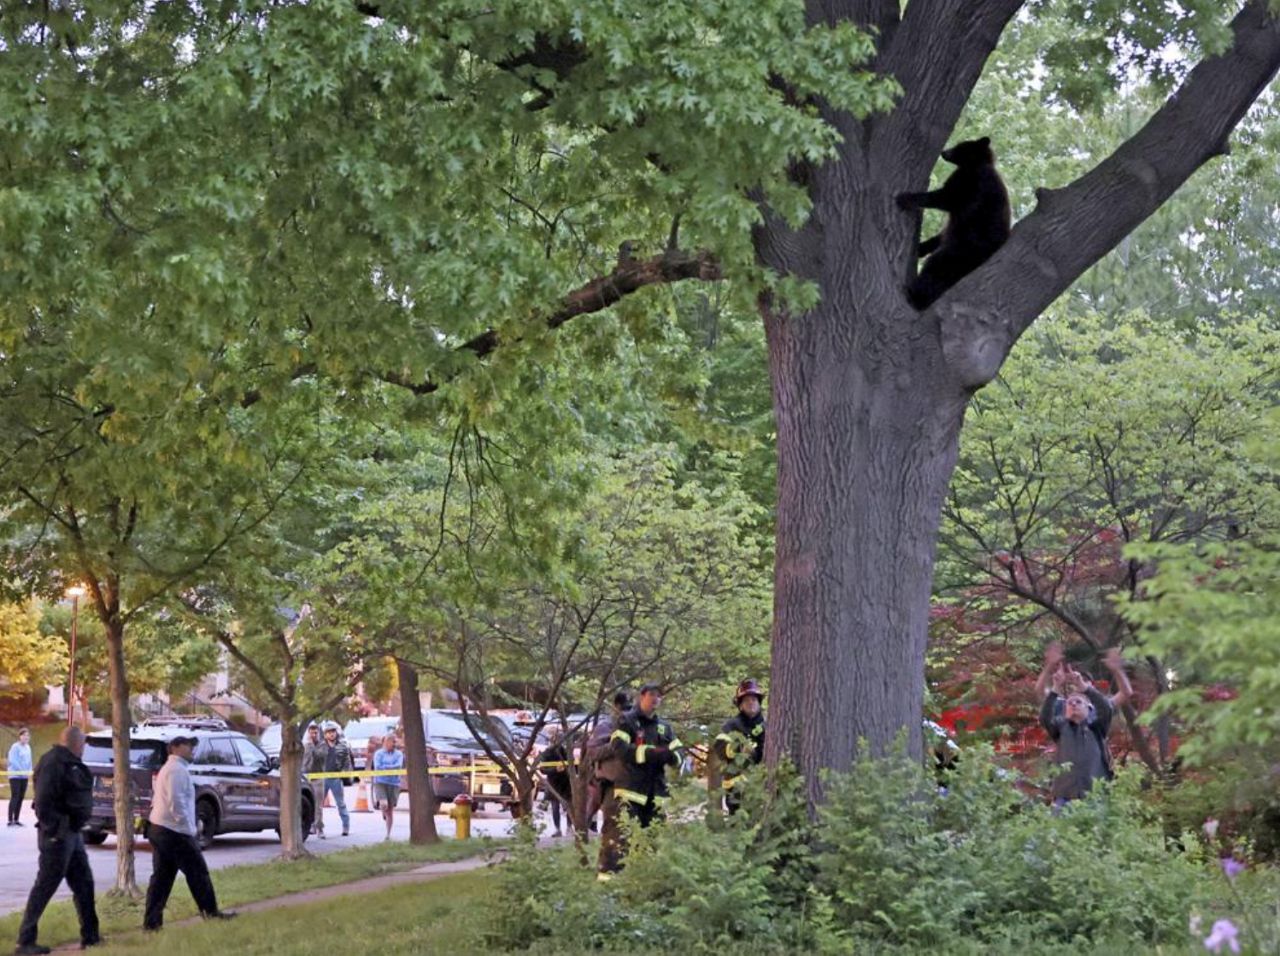 A groggy bear immobilized with a tranquilizer lies a tree in the front yard of a home in Richmond Heights, Mo., Sunday, May 9, 2021. Area fire departments and police assisted the Missouri Department of Conservation, who tranquilized the bear, to help get the bear out of the tree. (David Carson/St. Louis Post-Dispatch via AP)